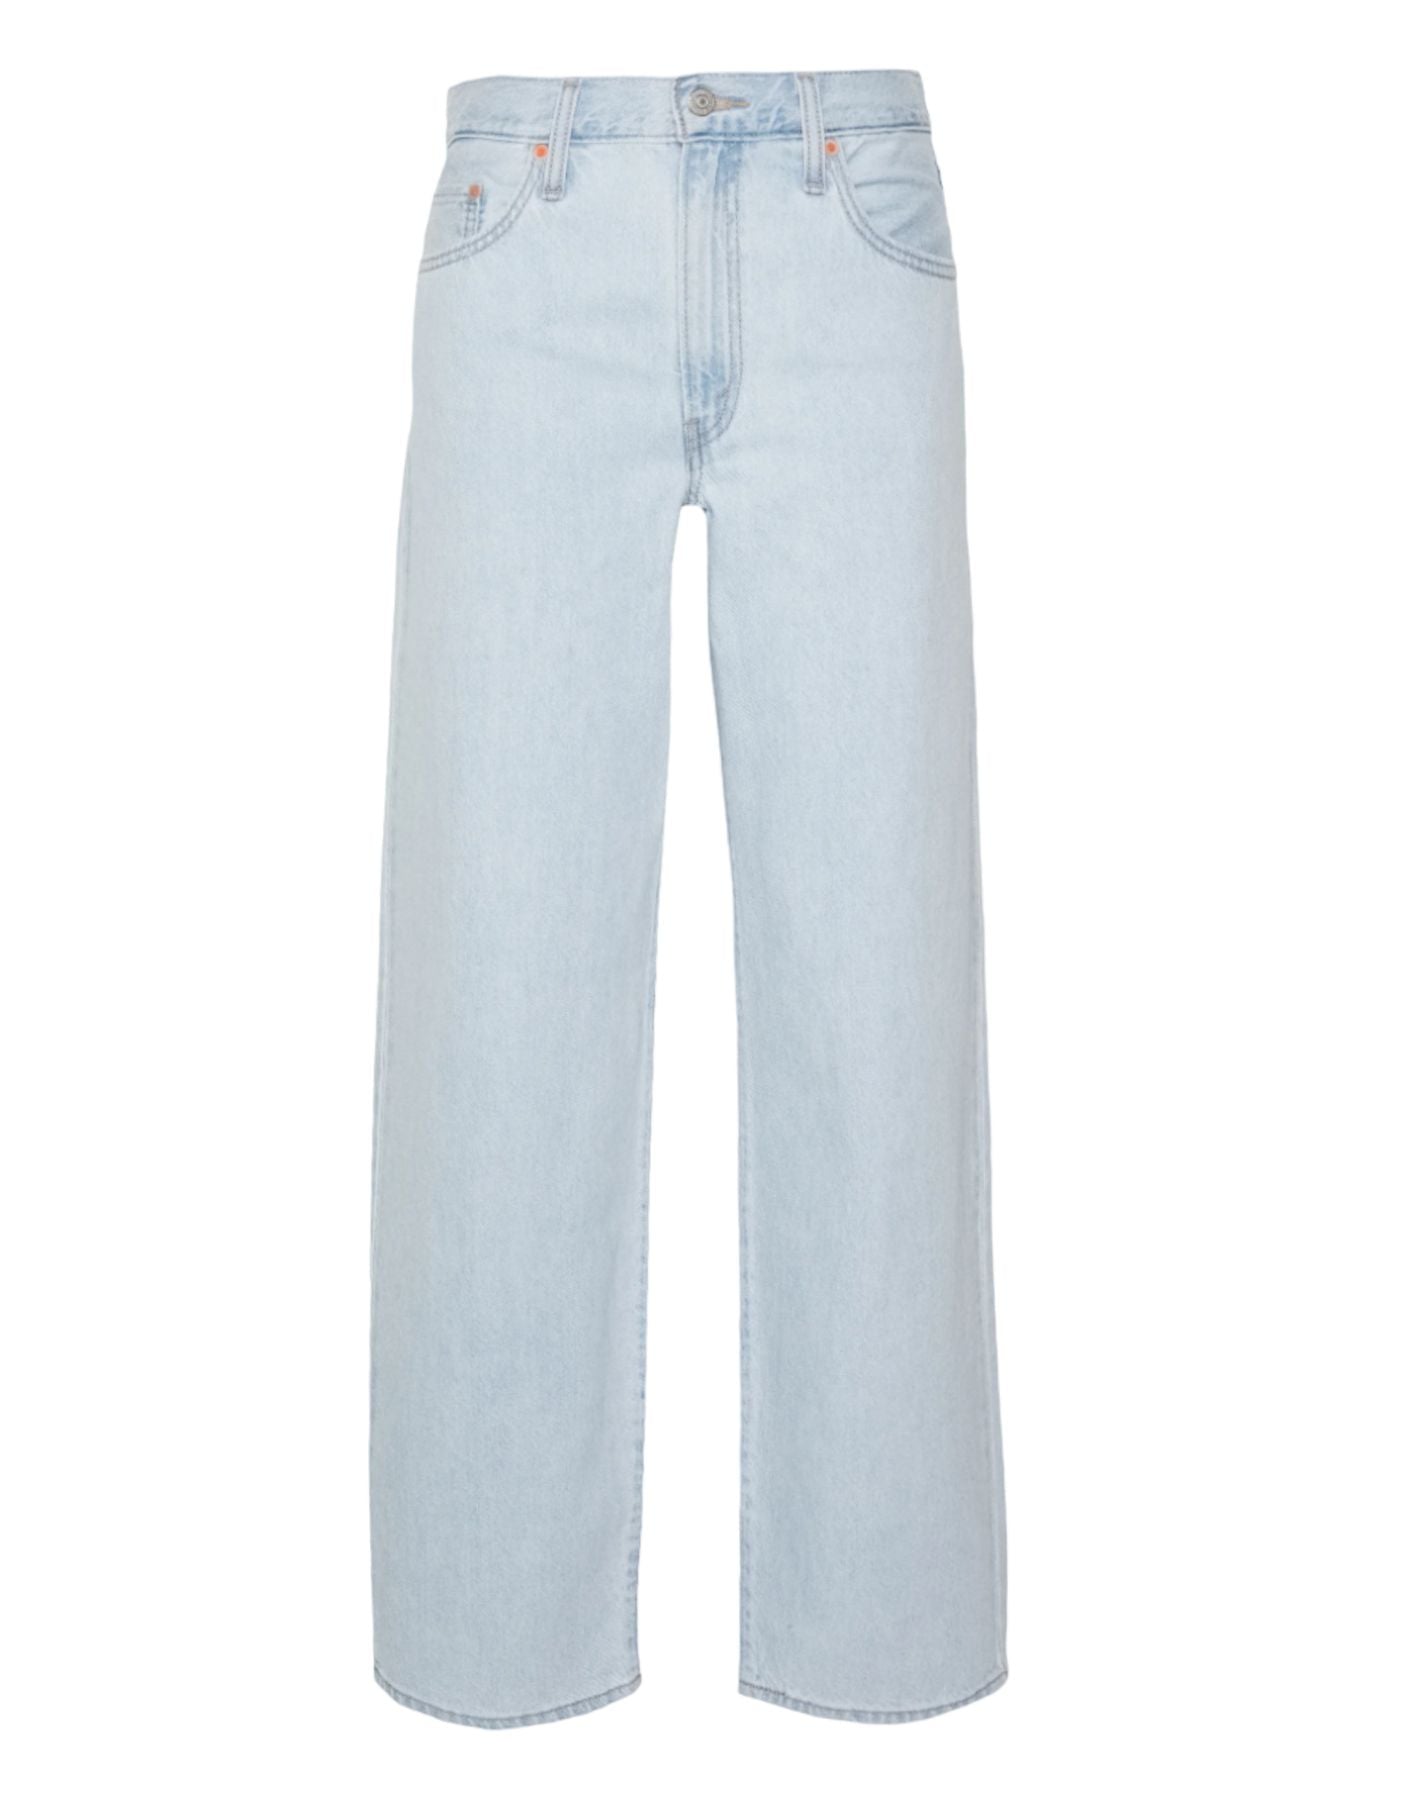 Jeans for woman A34940033 Levi's